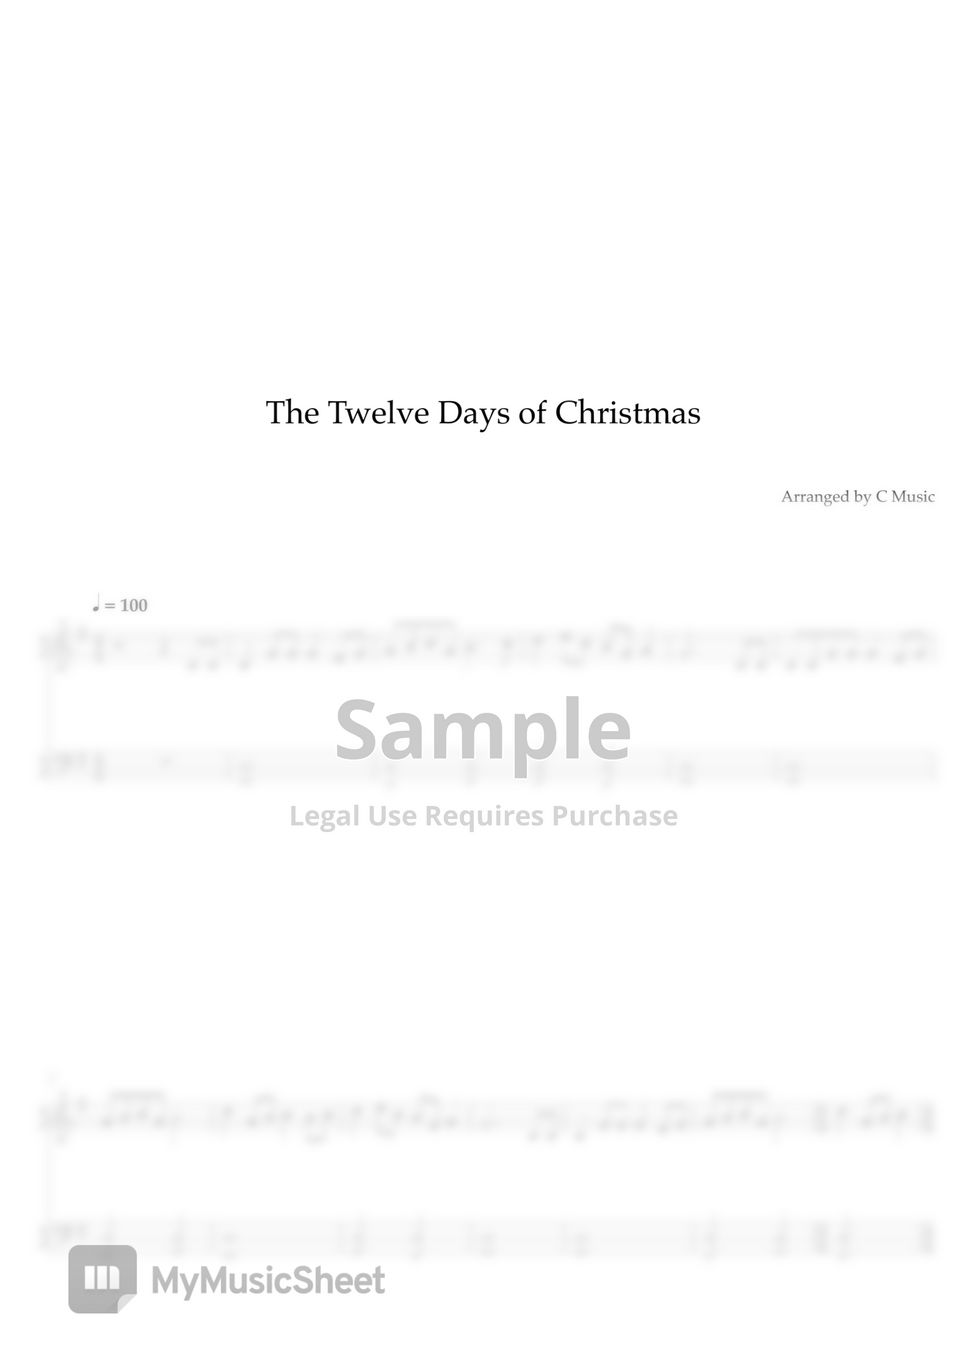 Traditional Christmas Carol - The Twelve Days of Chritmas (Easy Version) by C Music